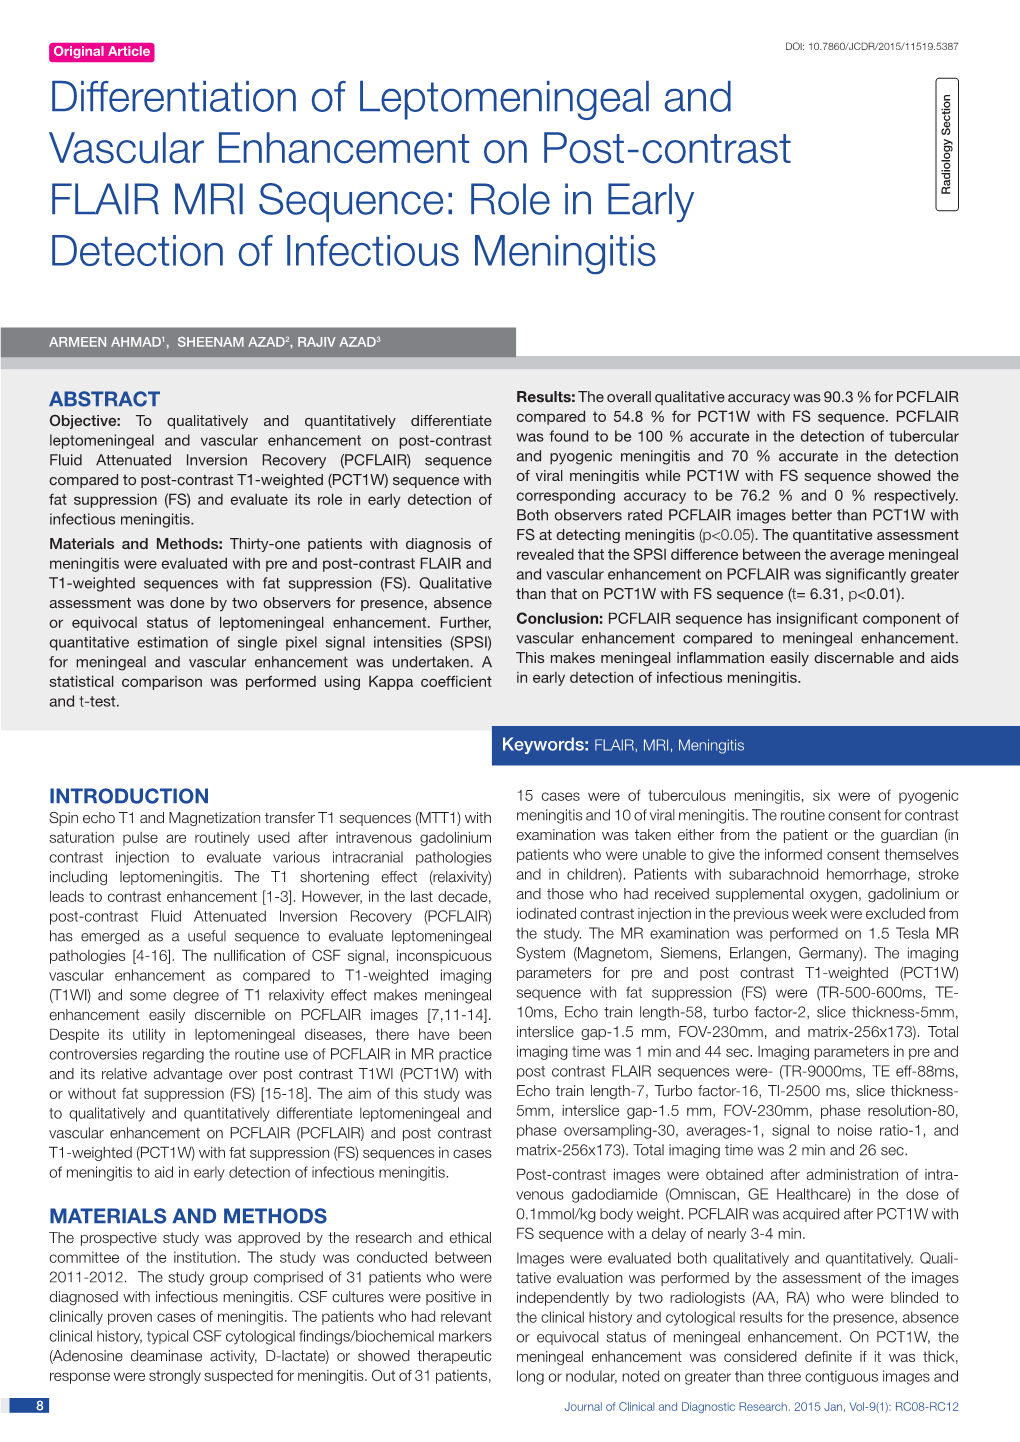 Differentiation of Leptomeningeal and Vascular Enhancement on Post-Contrast FLAIR MRI Sequence: Role in Early Radiology Section Detection of Infectious Meningitis